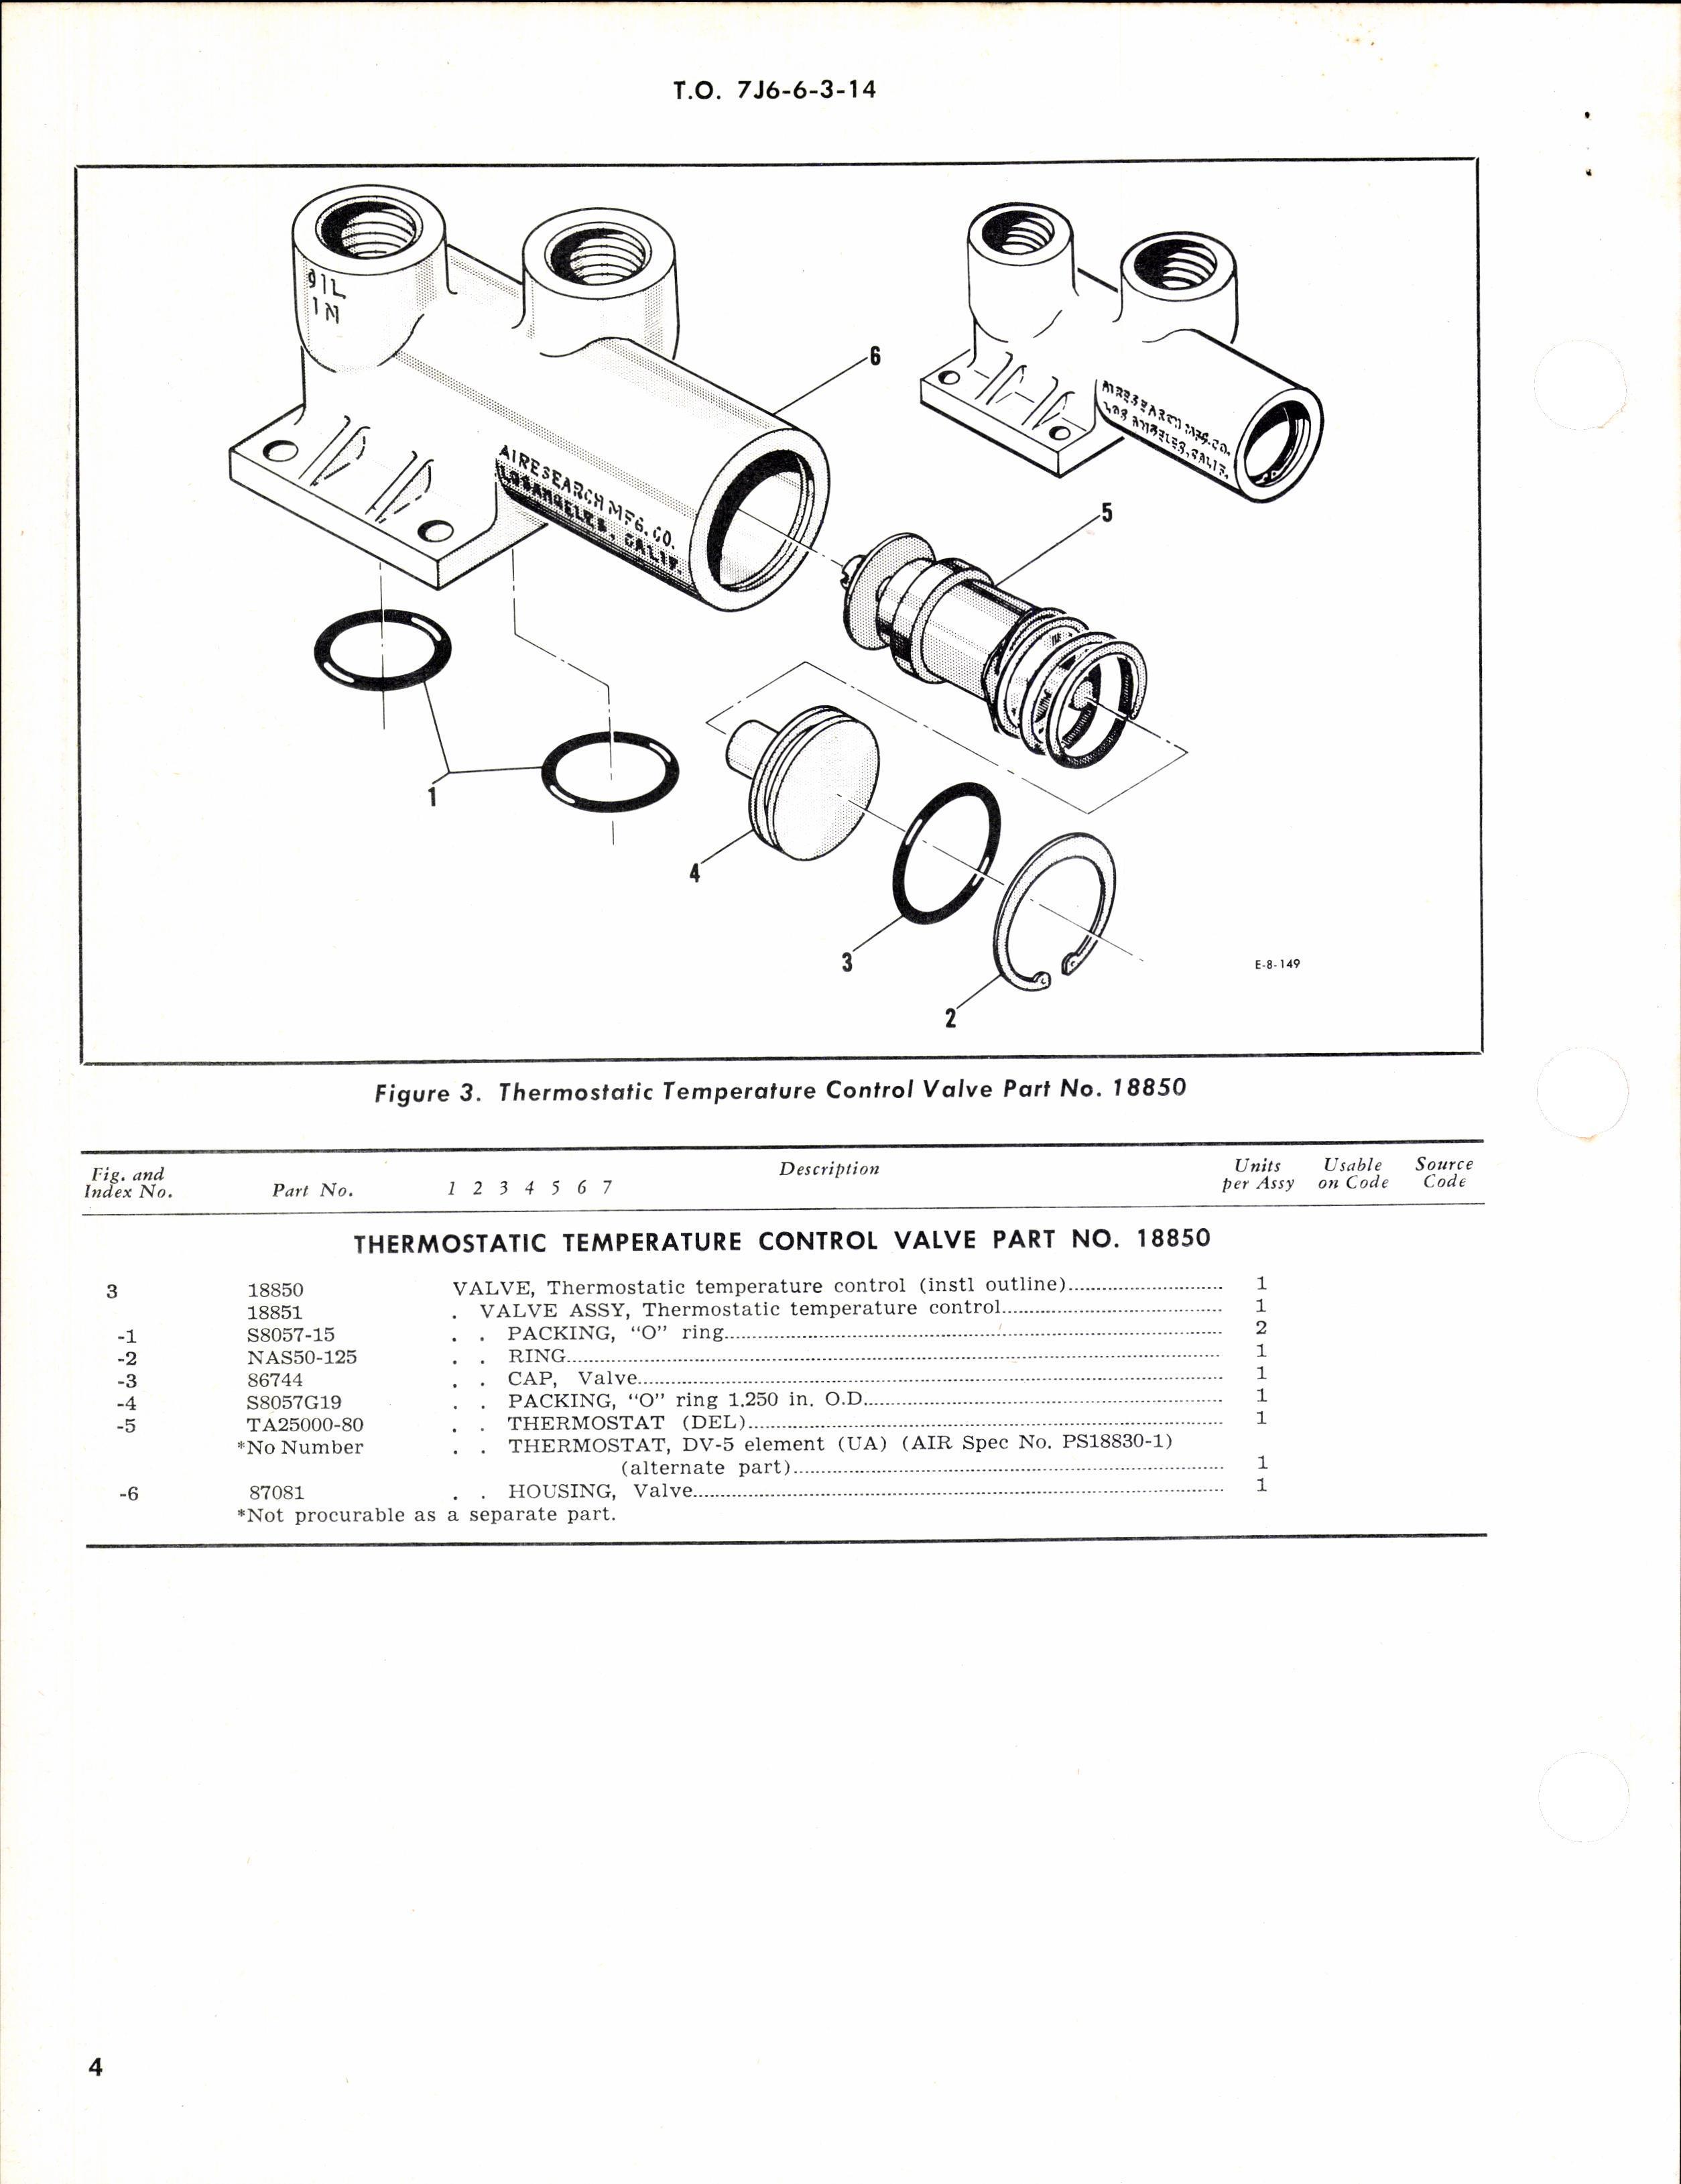 Sample page 4 from AirCorps Library document: Illustrated Parts Breakdown for Thermostatic Temperature Control Valves